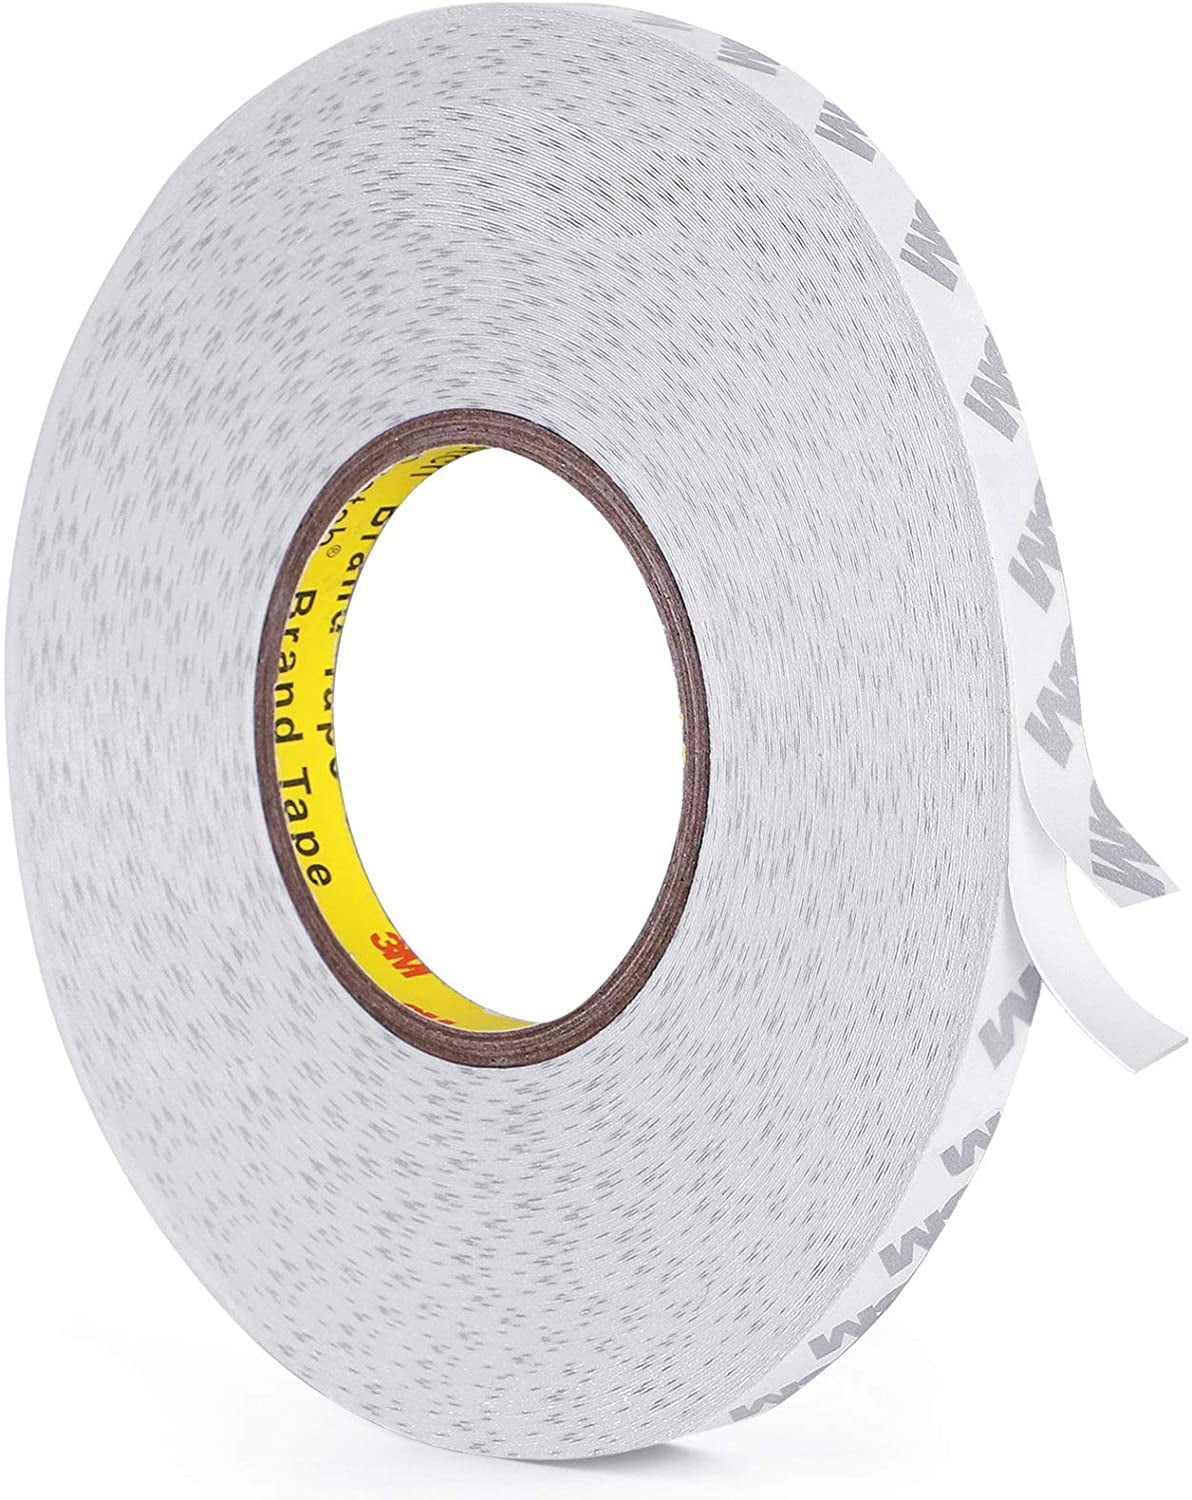 Double-Sided Tape Refill Repositionable Dots 10m - Buy now